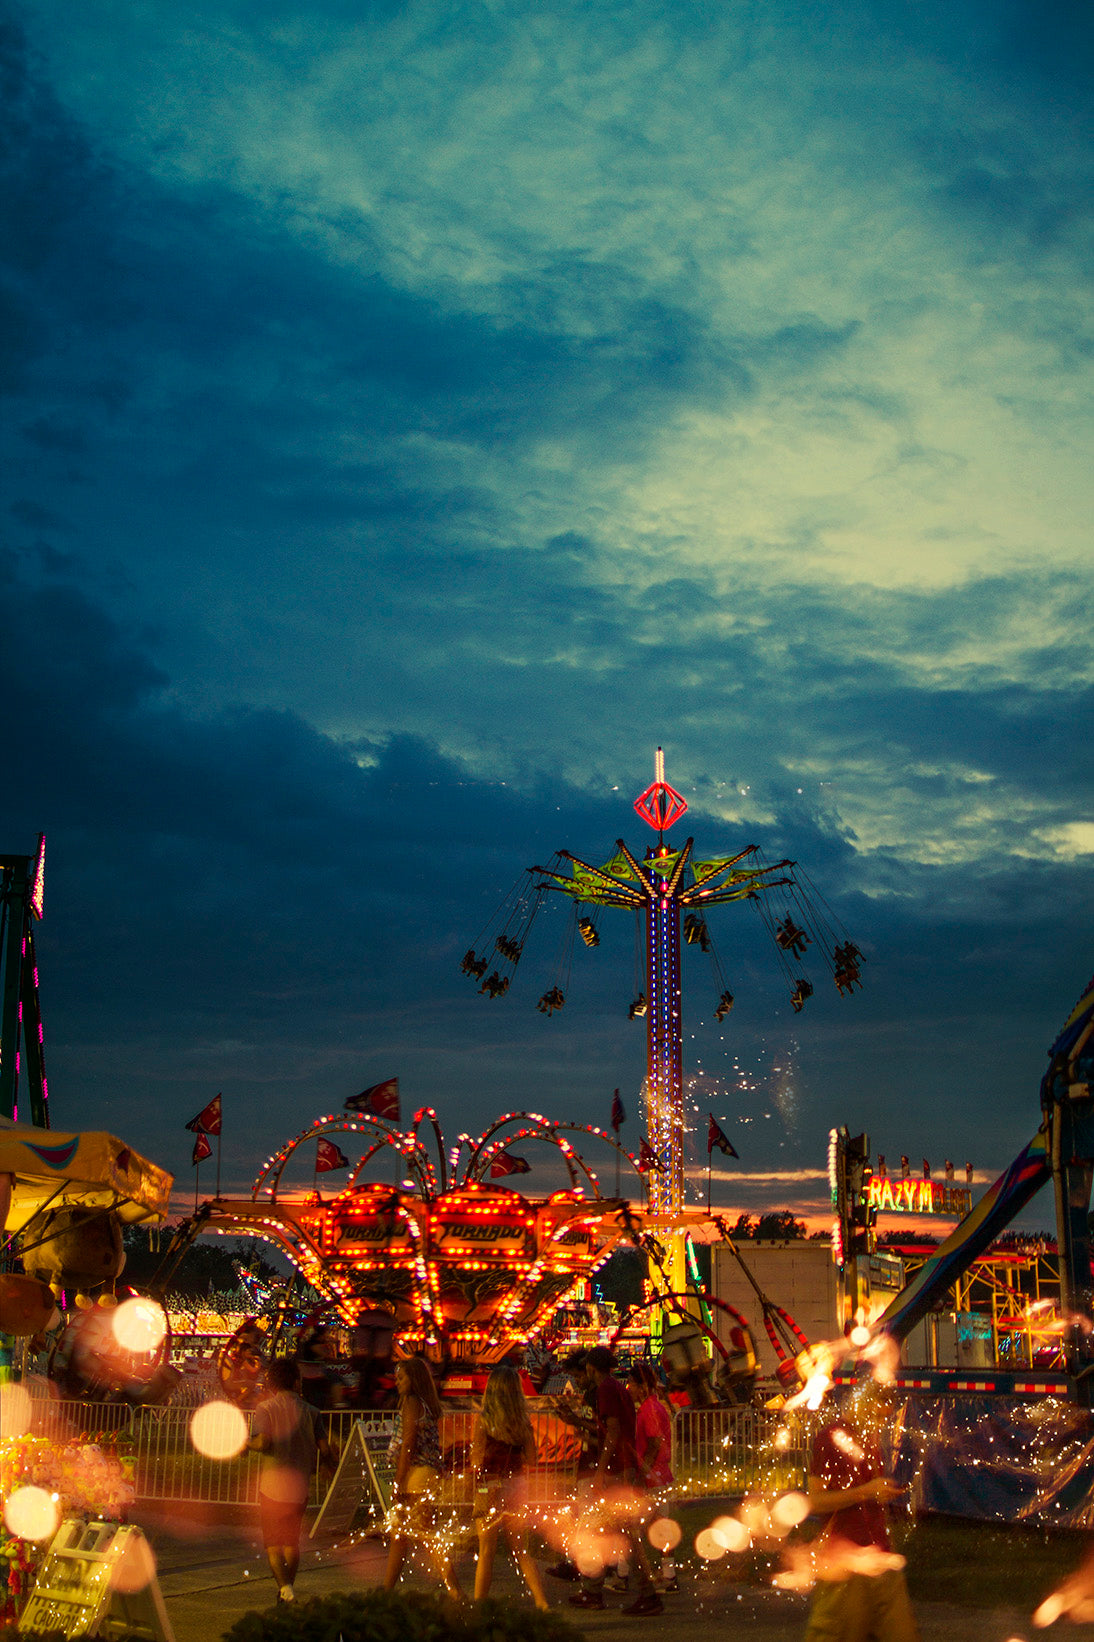 This photograph by Shannon Black presents a captivating interplay between the static and the ephemeral, the grounded reality of the fair and the transient beauty of the light sparks. It invites viewers to reflect on the fleeting nature of enjoyment and the preciousness of moments that illuminate our lives.